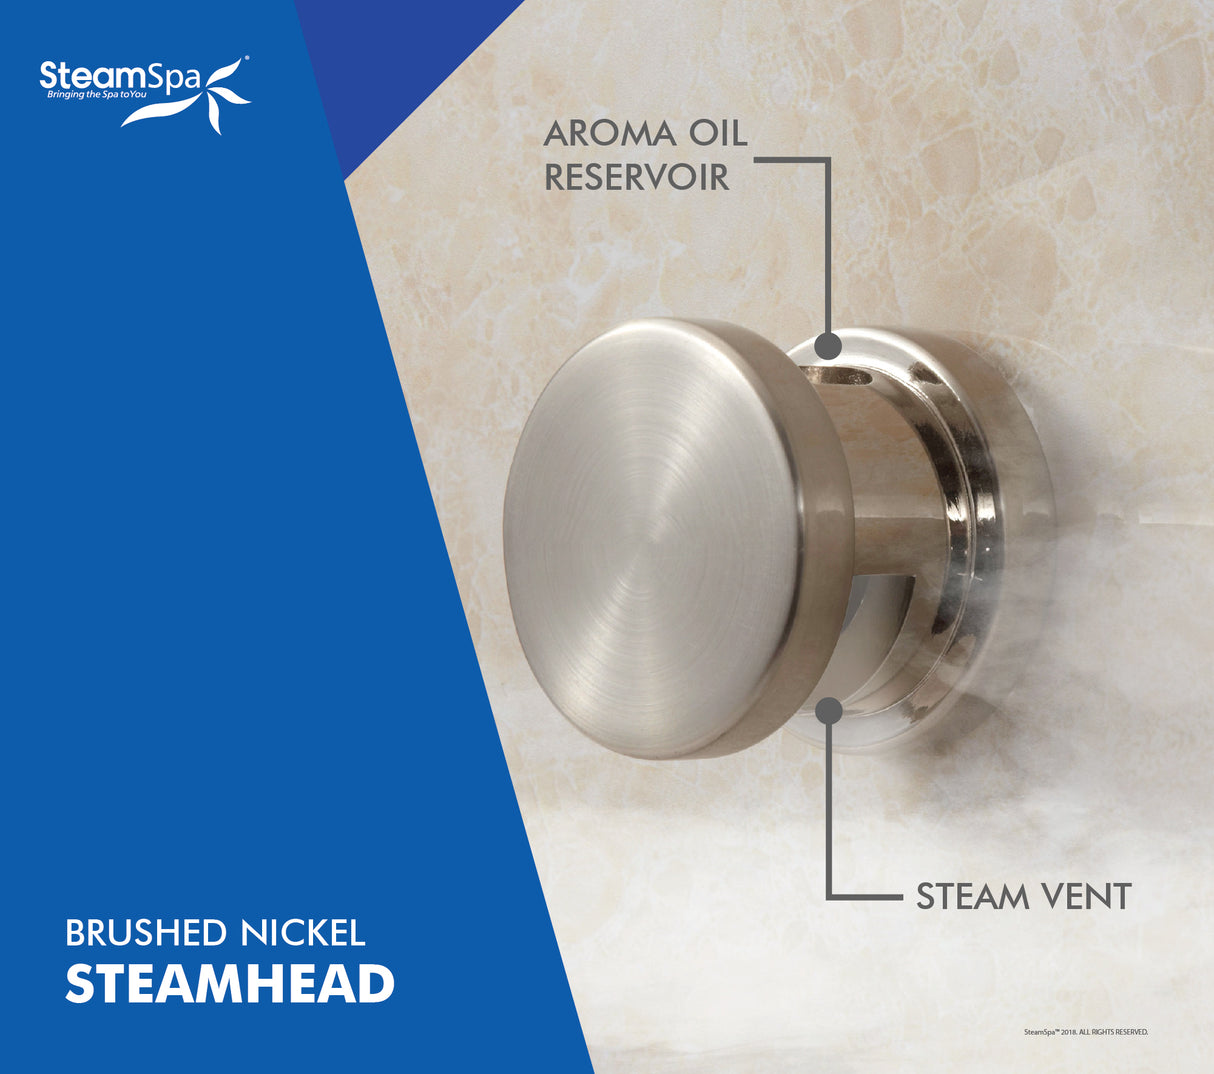 SteamSpa Executive 12 KW QuickStart Acu-Steam Bath Generator Package with Built-in Auto Drain in Brushed Nickel EXR1200BN-A